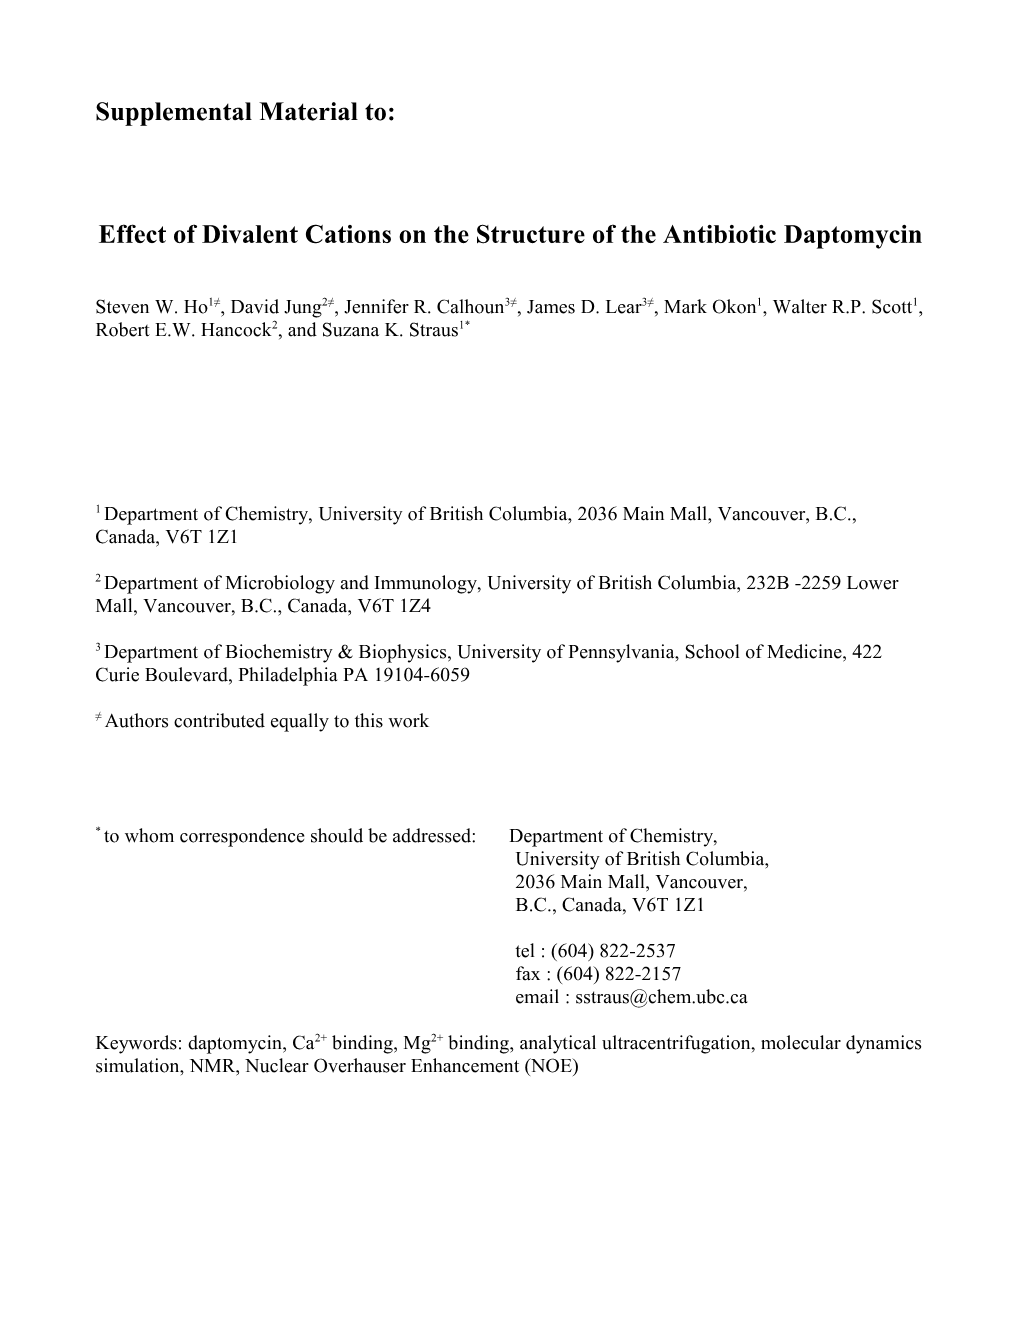 Effect of Divalent Cations on the Structure of the Antibiotic Daptomycin